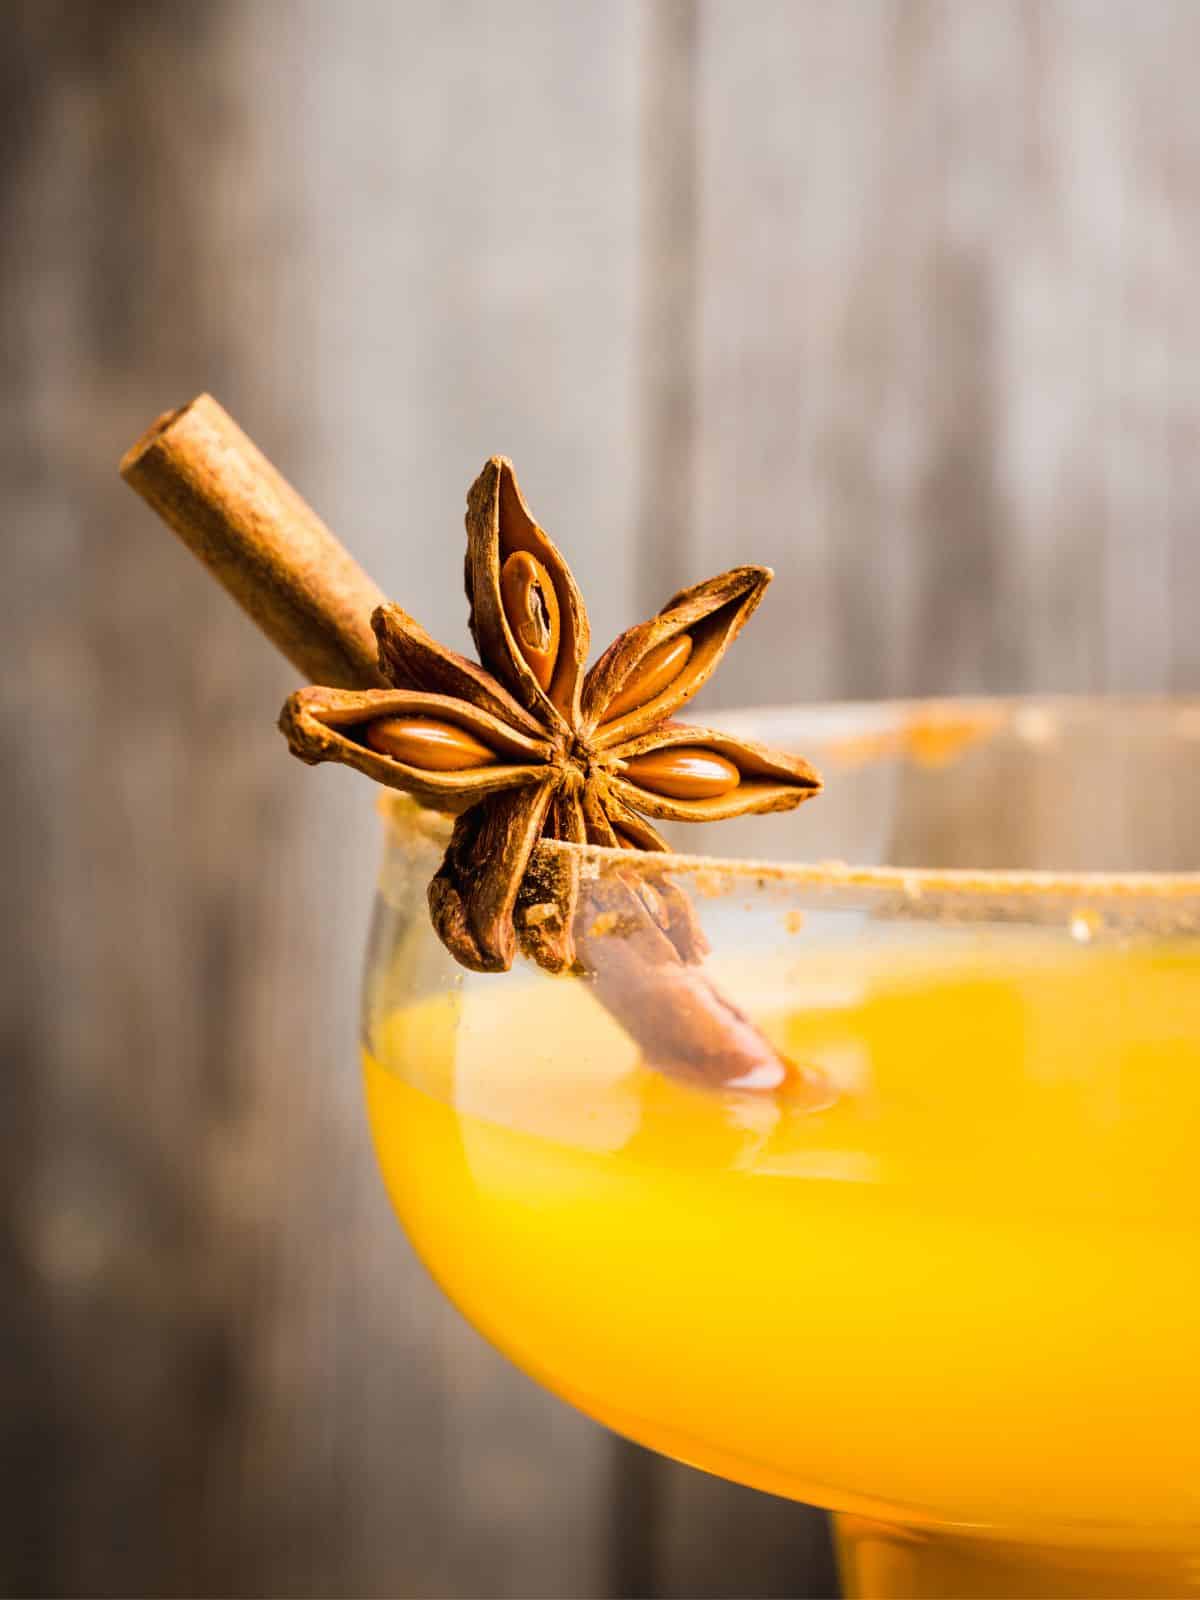 Close up of cinnamon stick and star anise on rim of pumpkin margarita.